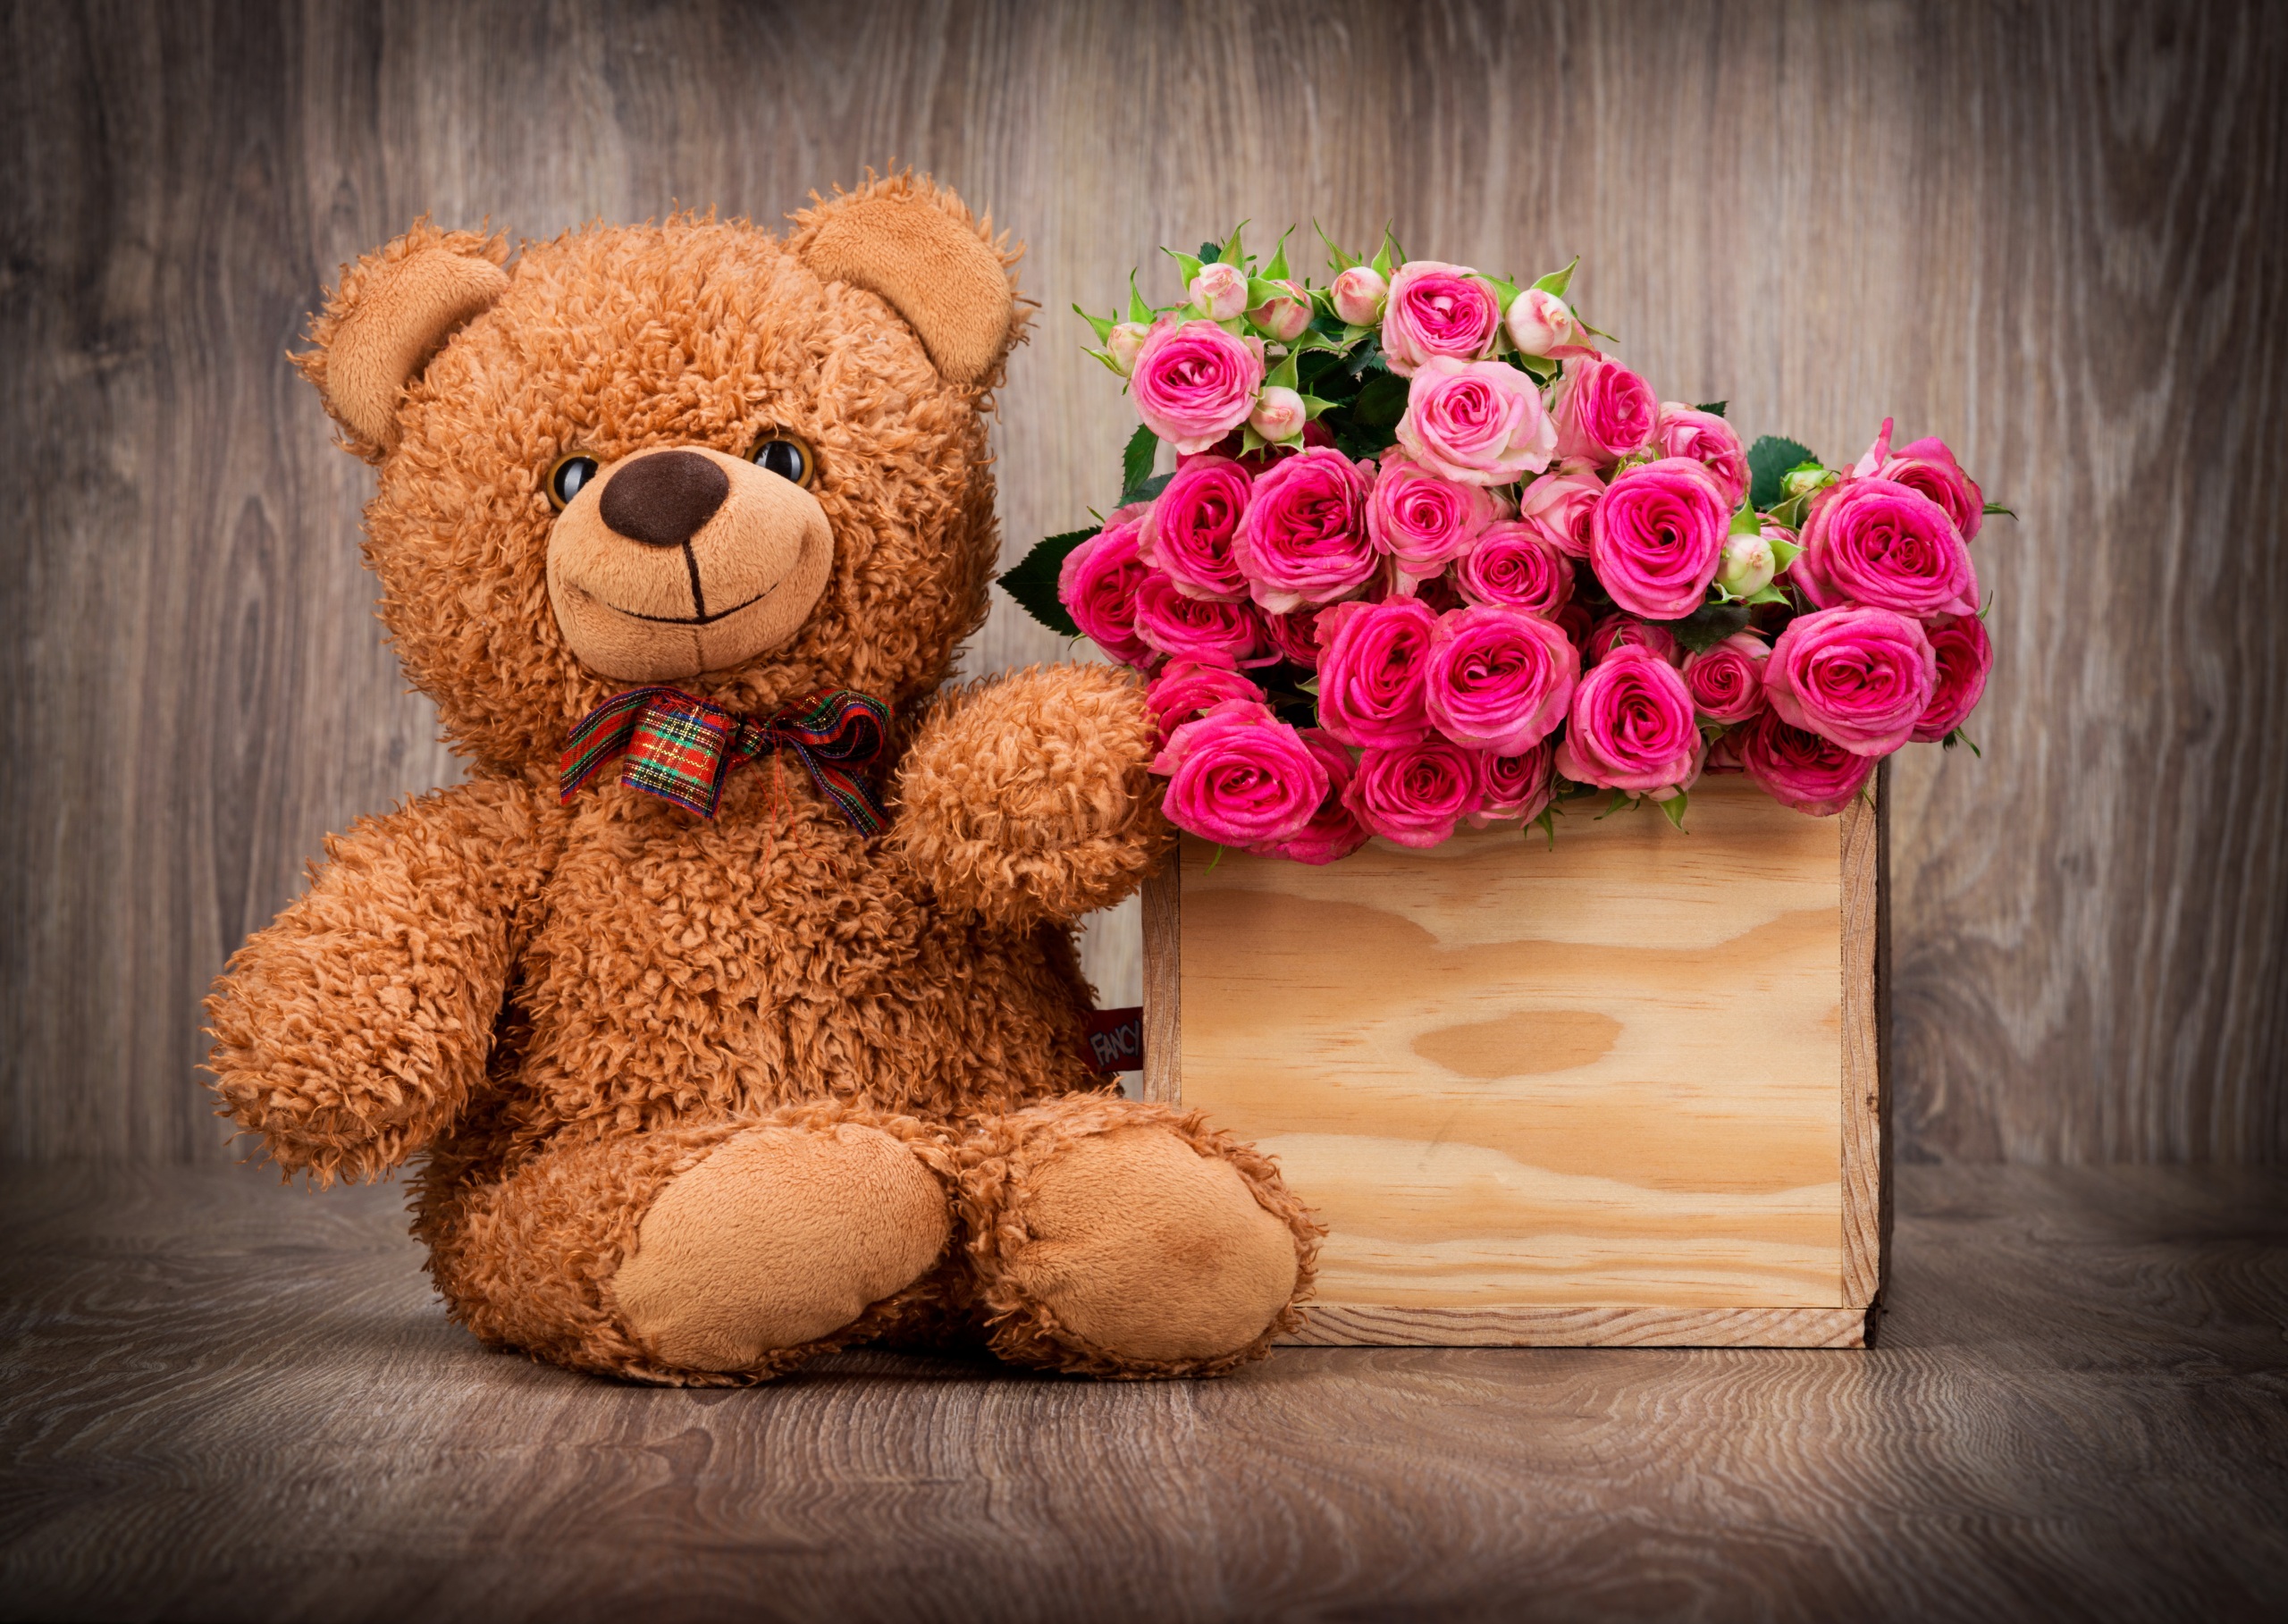 Cute Teddy Bear Wallpaper with Pink Roses in Box - HD Wallpapers